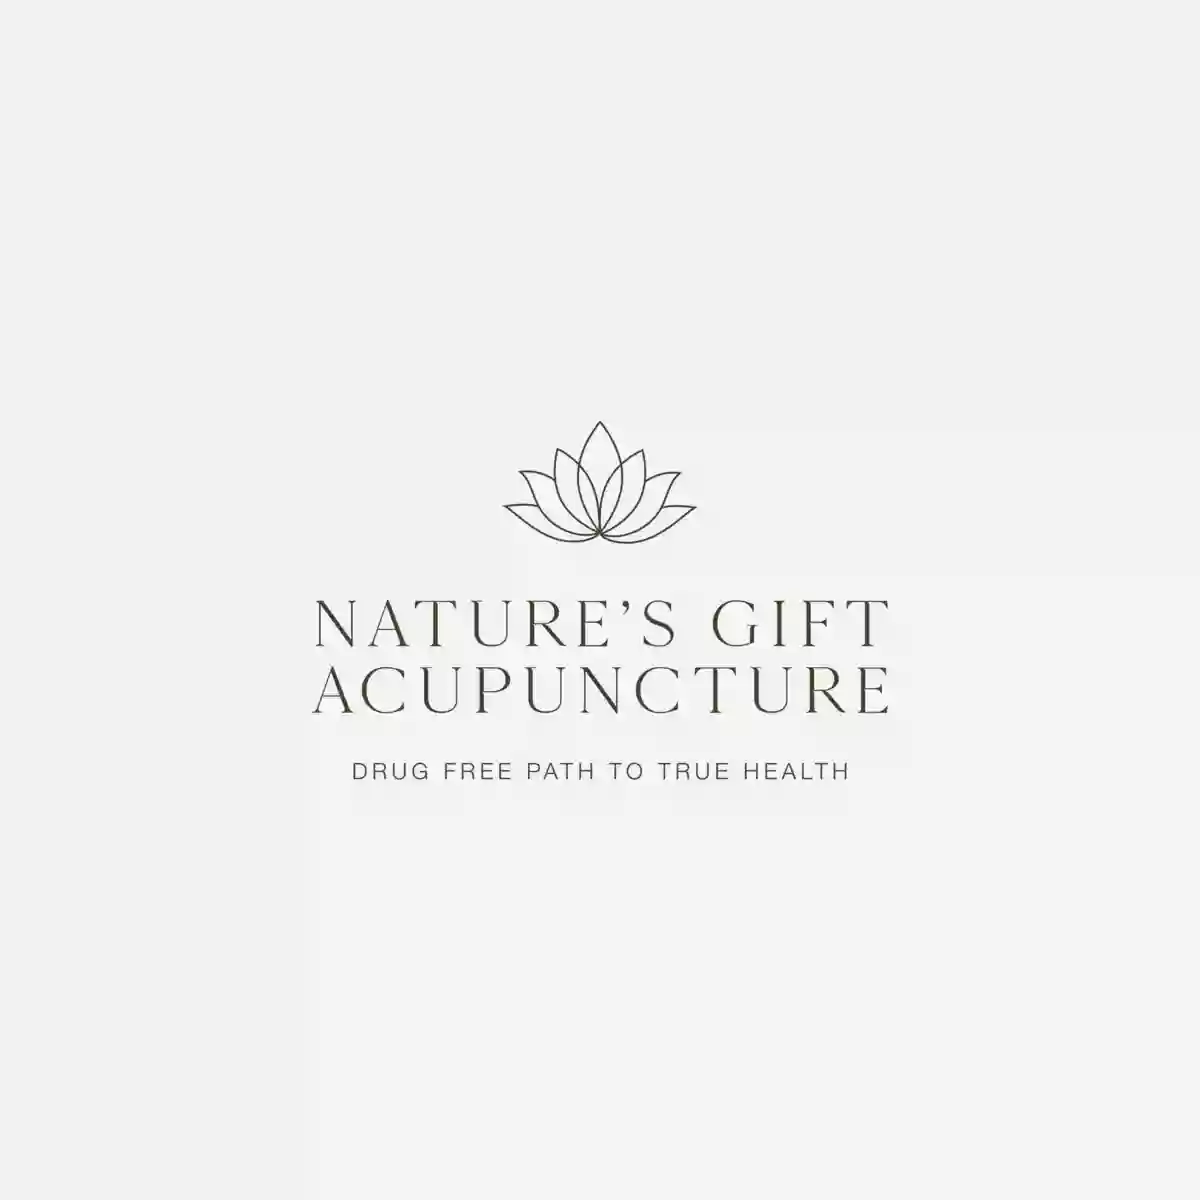 Nature's Gift Acupuncture